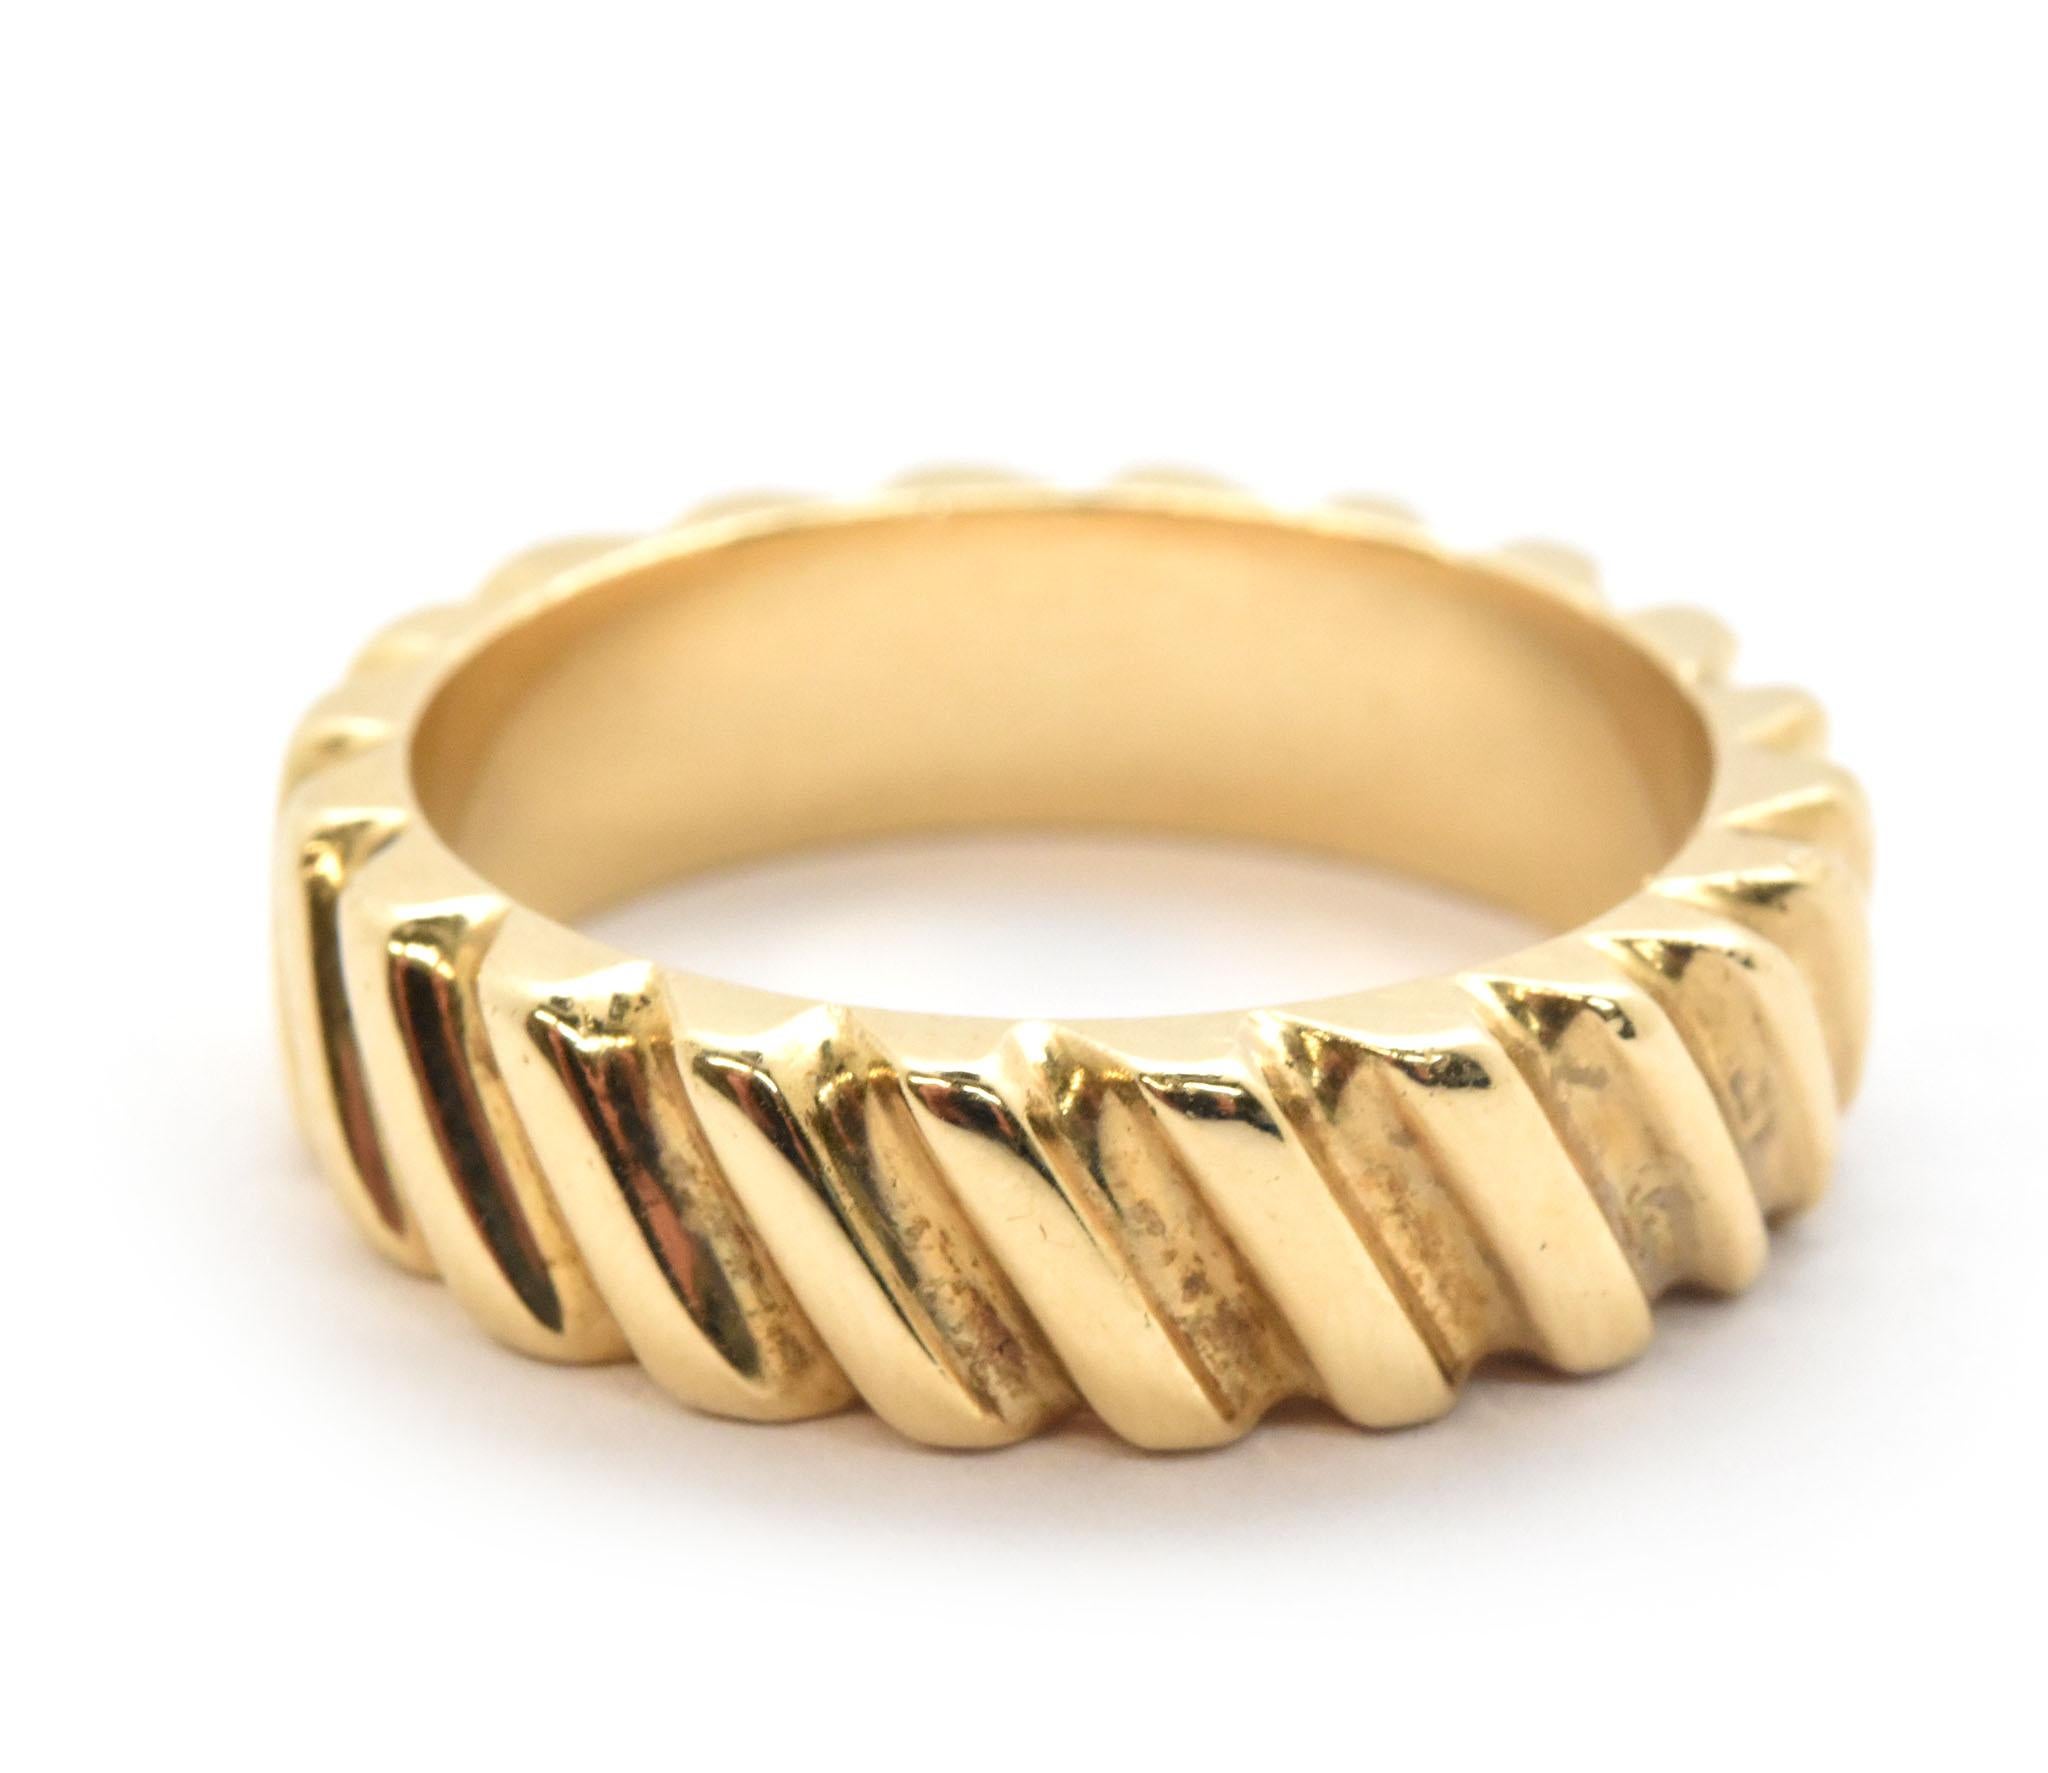 This wedding band is made in solid 14k yellow gold. It measures 6mm wide, and has diagonal fluting around for a unique look. The ring weighs 8.9 grams, and it is a size 8.5.